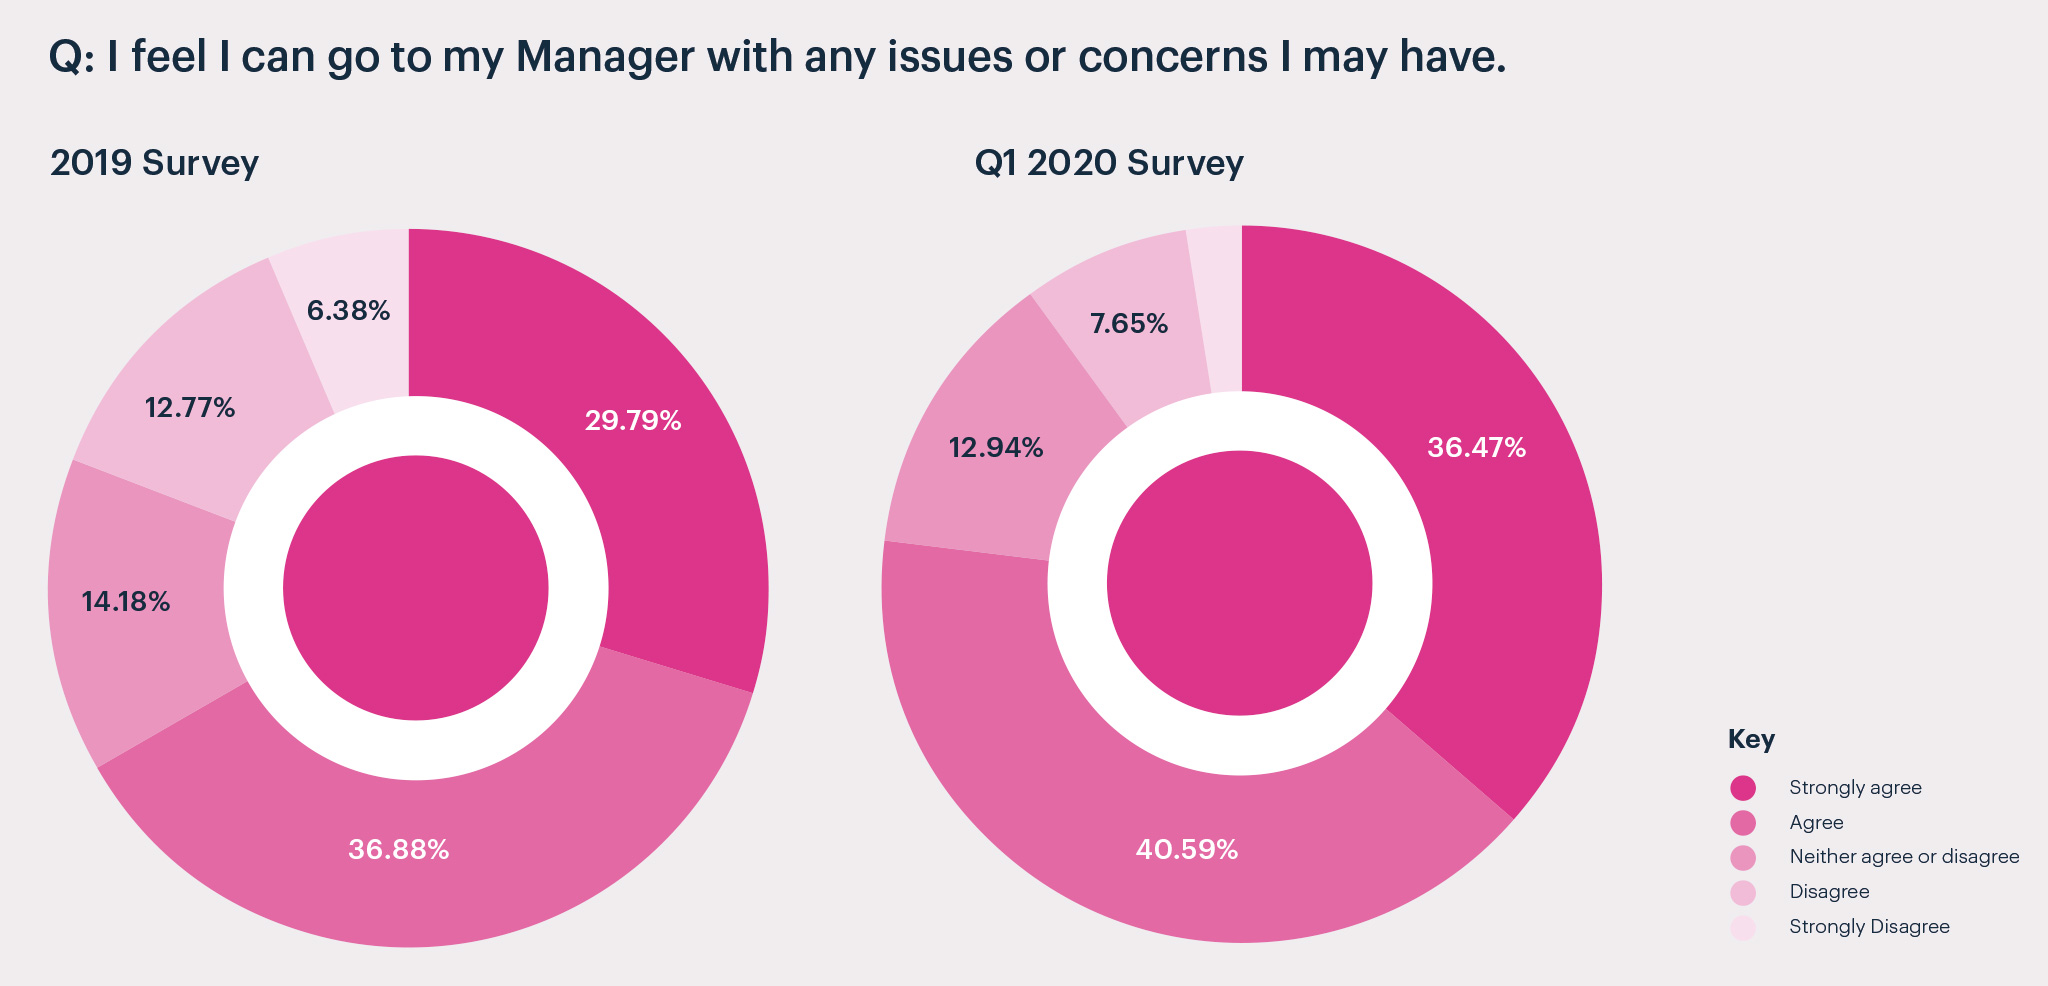 Pie chart showing results of an employee engagement survey